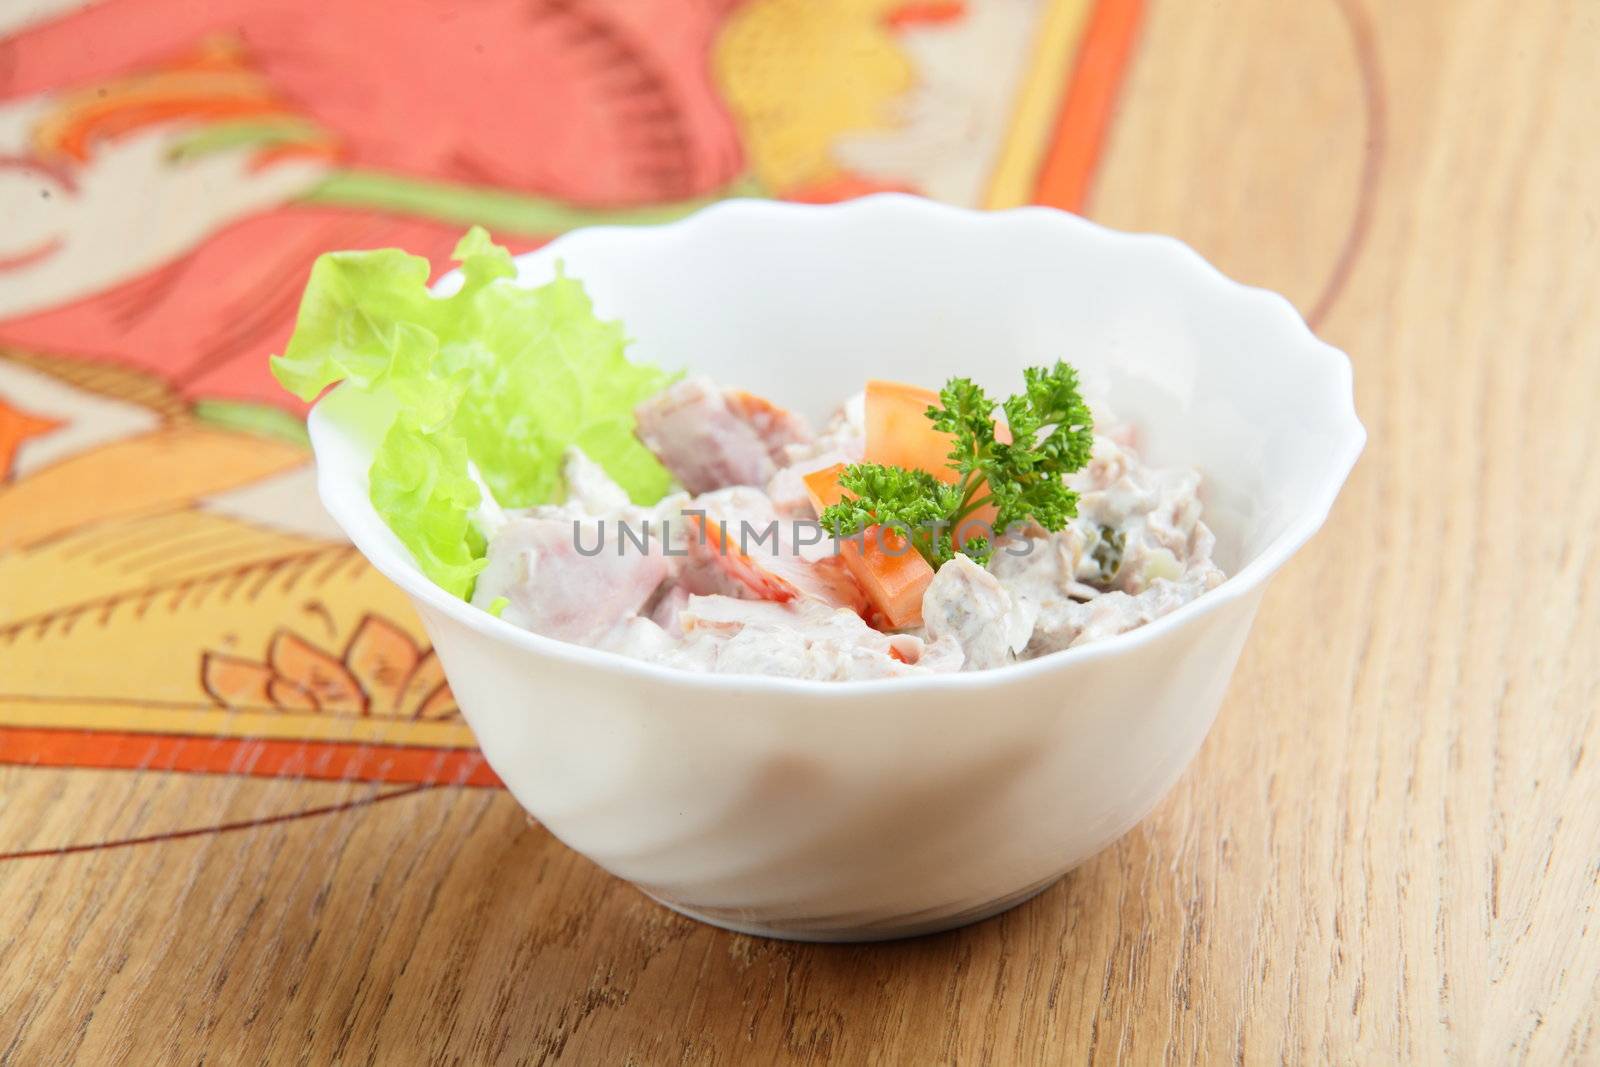 salad in white dish and wooden background